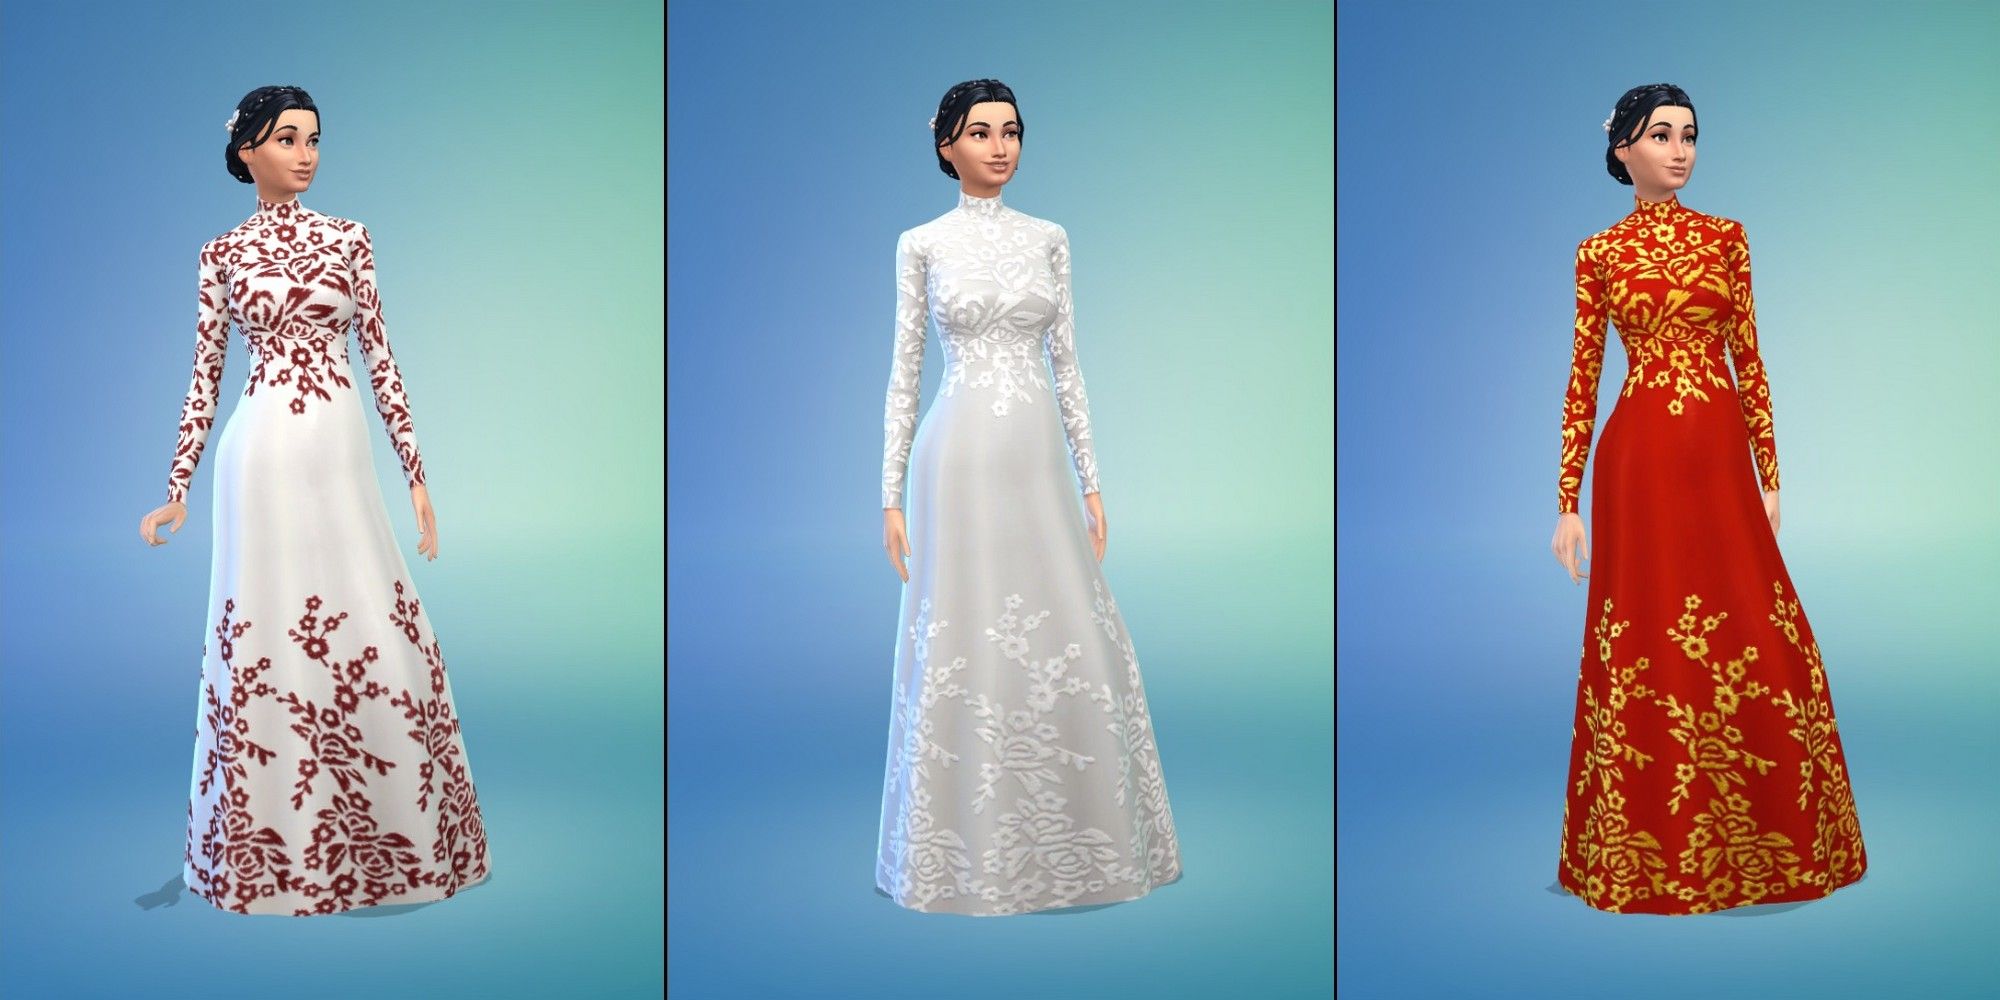 Sims 4 Wedding Dress Floral Lace High Neck